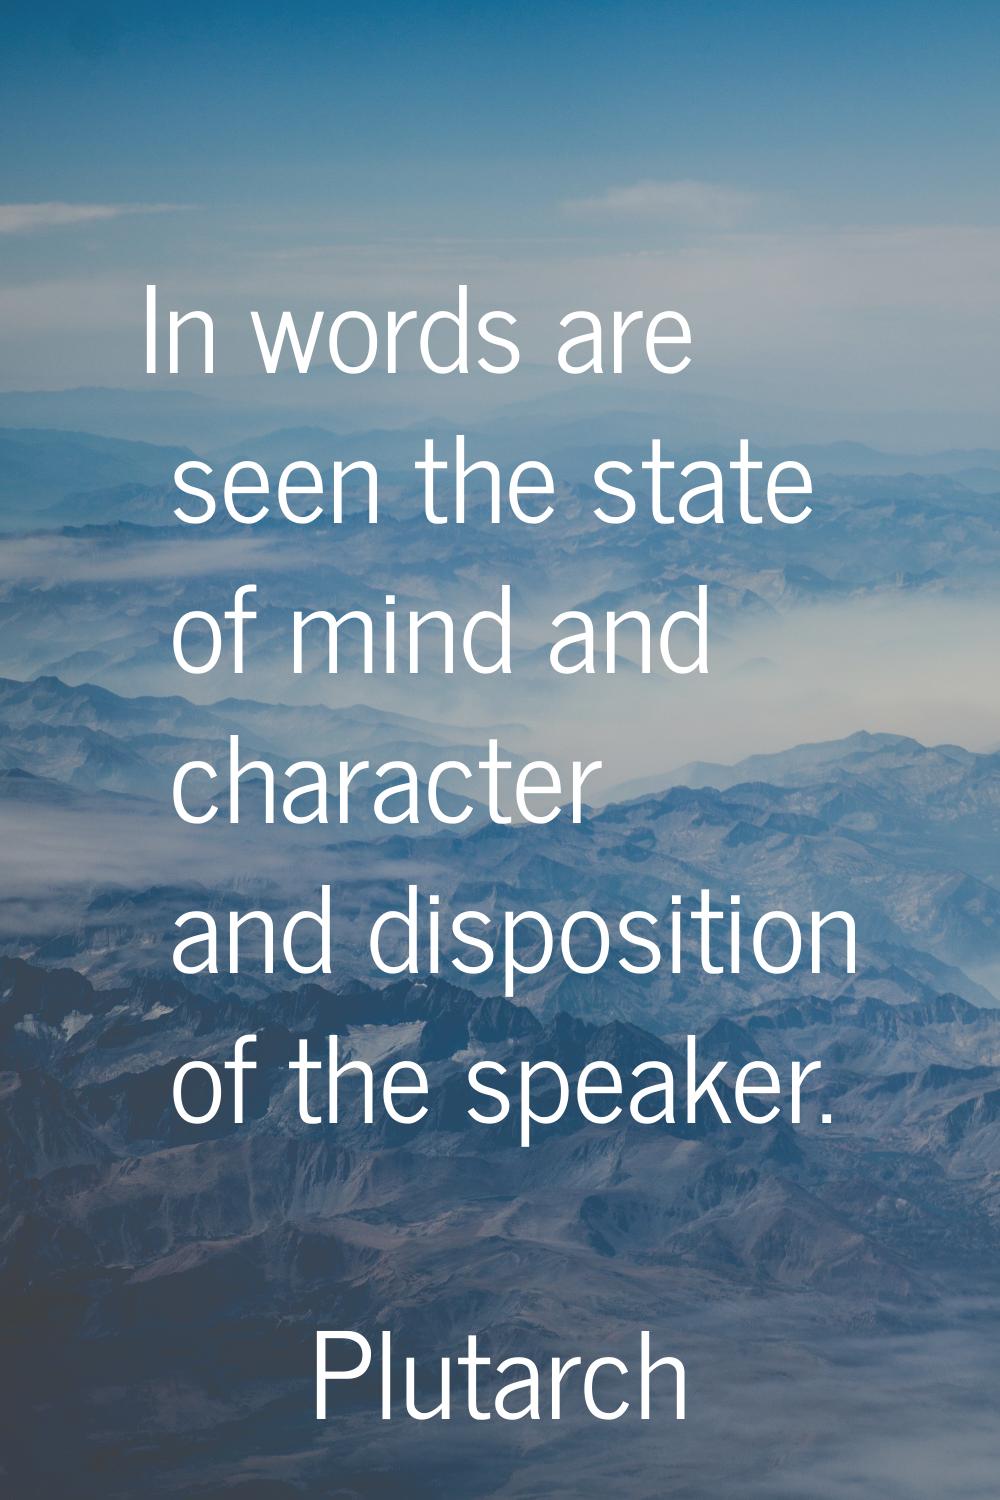 In words are seen the state of mind and character and disposition of the speaker.